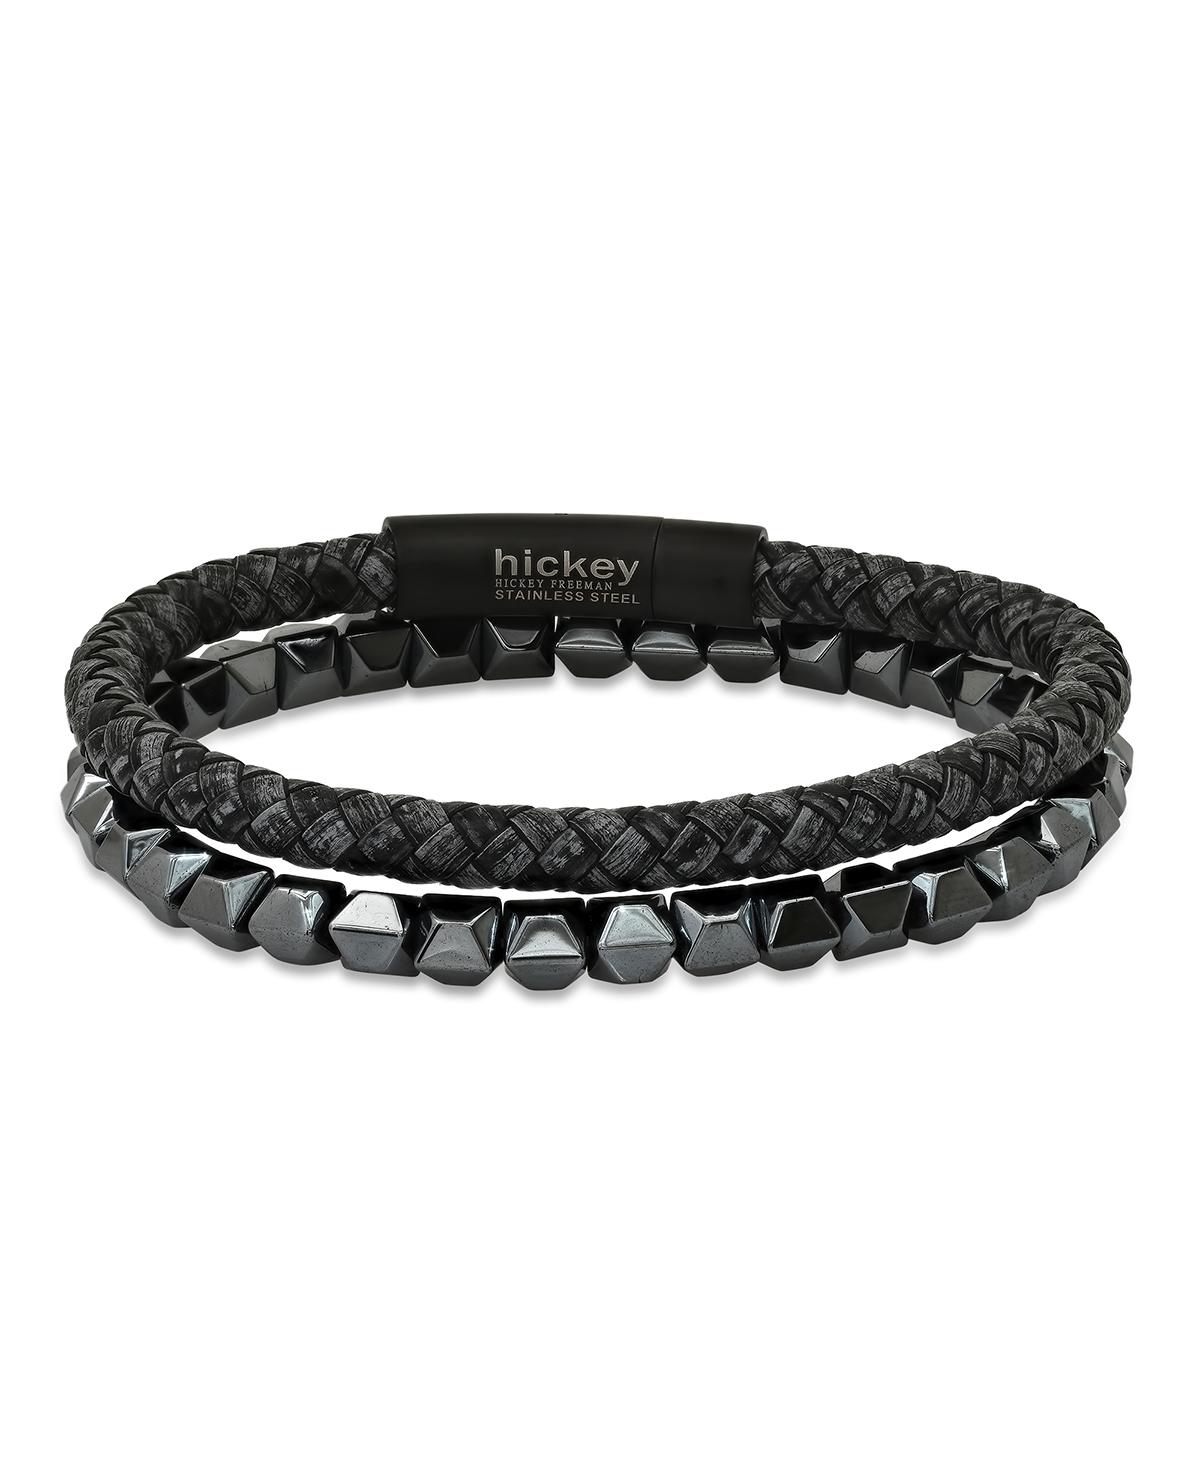 hickey by Hickey Freeman Studded Faceted Hematite Beaded Stretch Bracelet, 2 Piece Set - Charcoal